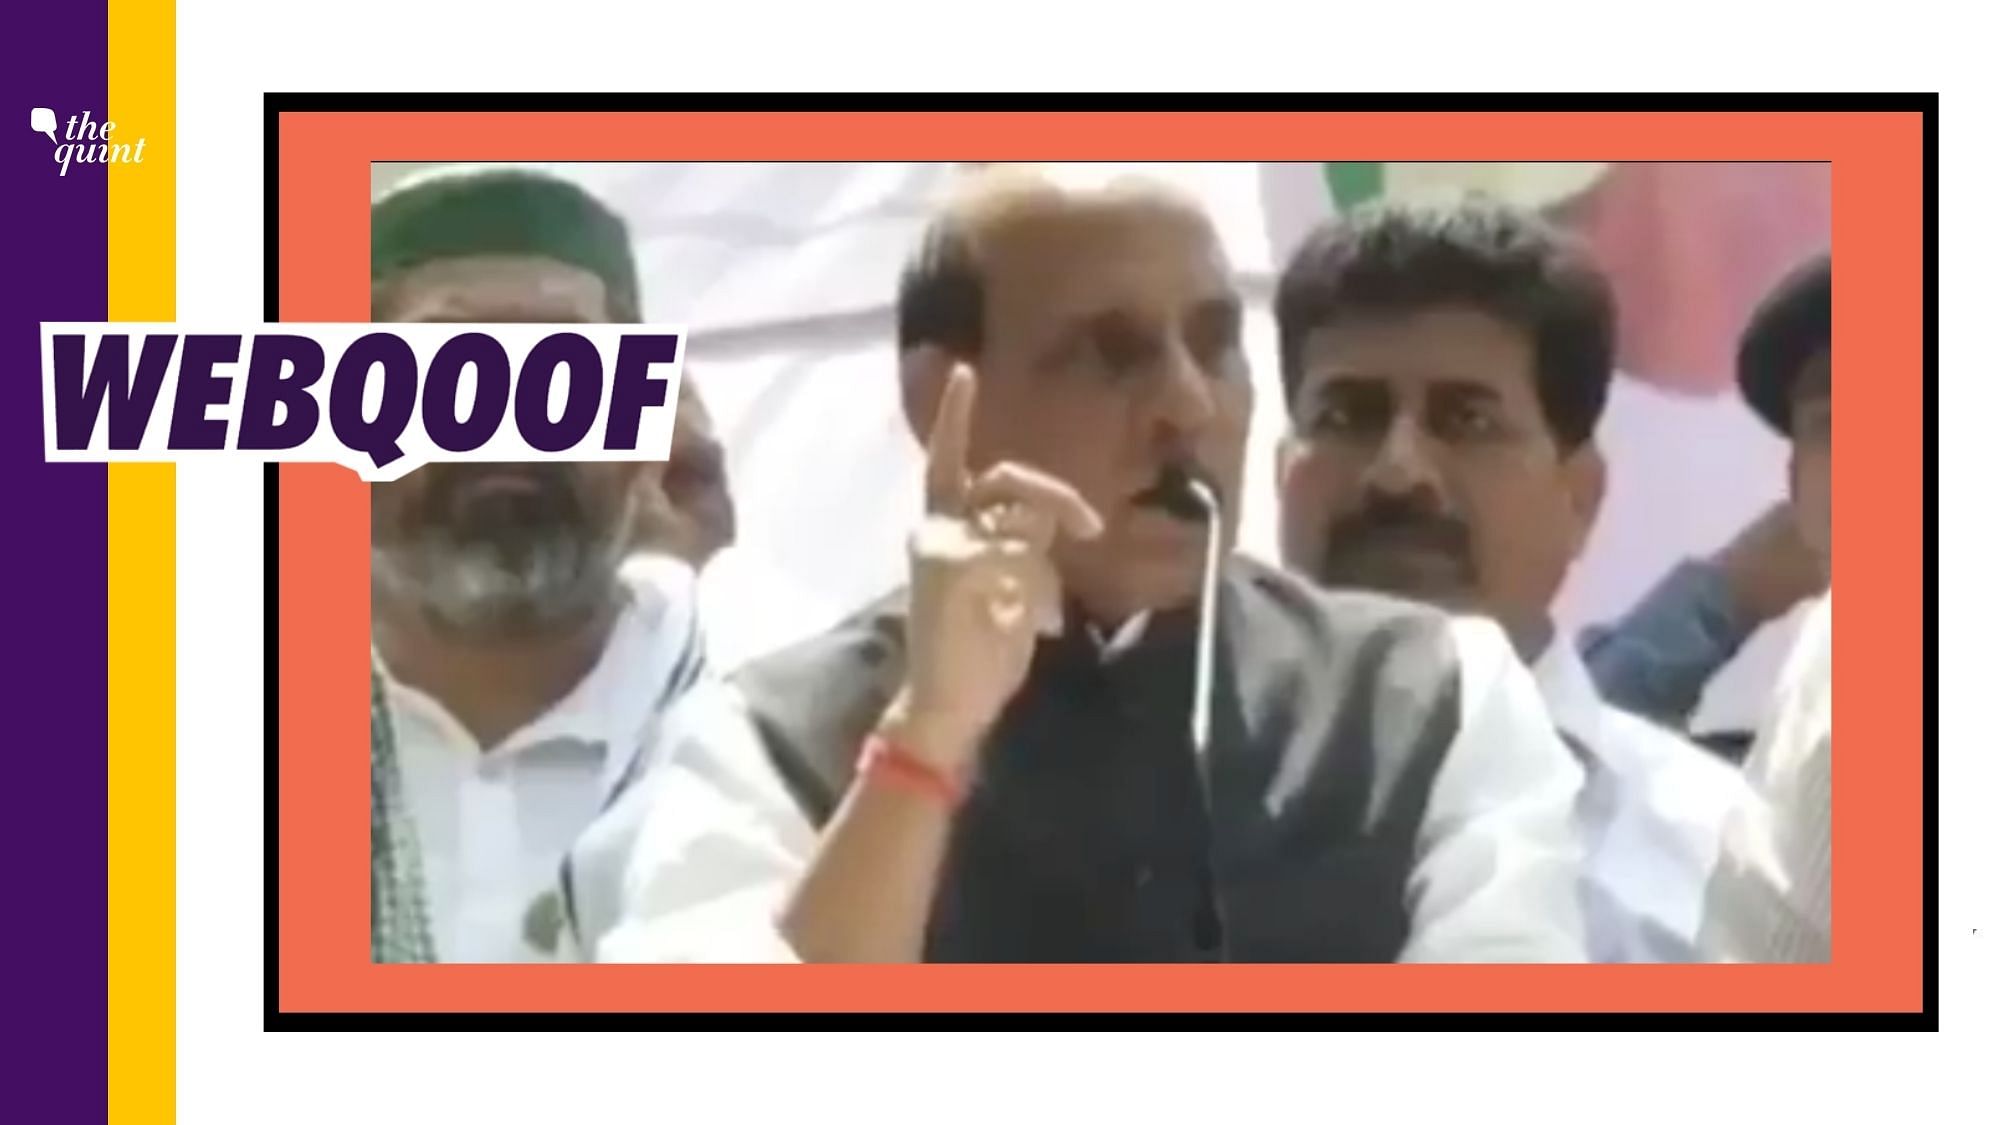 An old video from 2013 was revived to falsely claim that Rajnath Singh has come out to support protesting farmers.